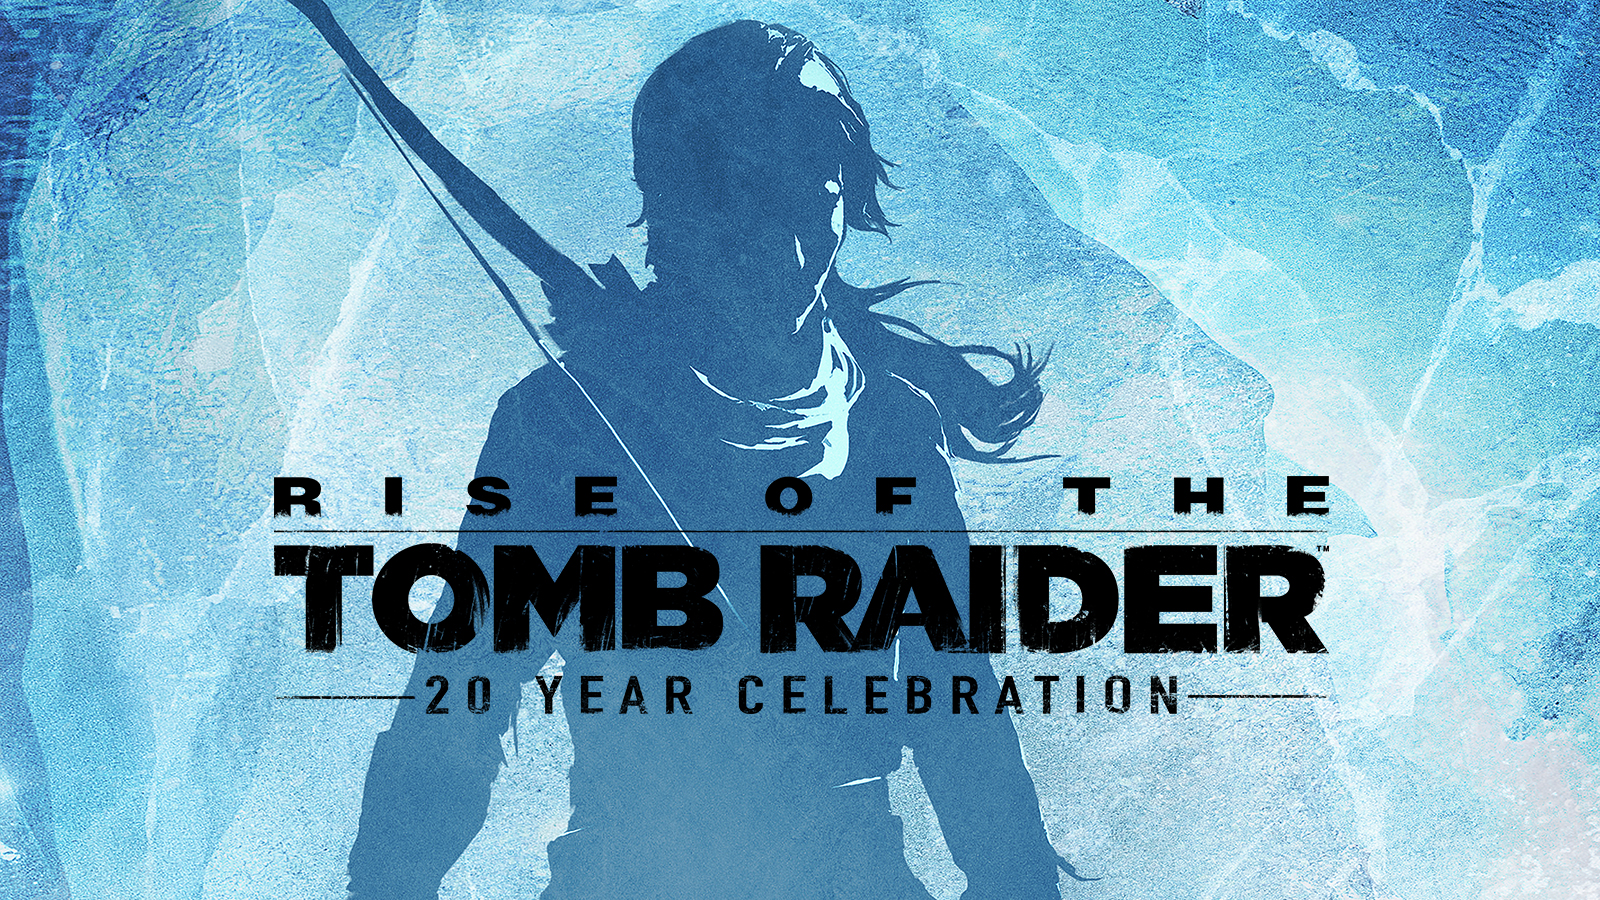 Media asset in full size related to 3dfxzone.it news item entitled as follows: Rise of the Tomb Raider: 20 Year Celebration in arrivo su Linux e macOS | Image Name: news27862_Rise-of-the-Tomb-Raider-20-Year-Celebration_1.png